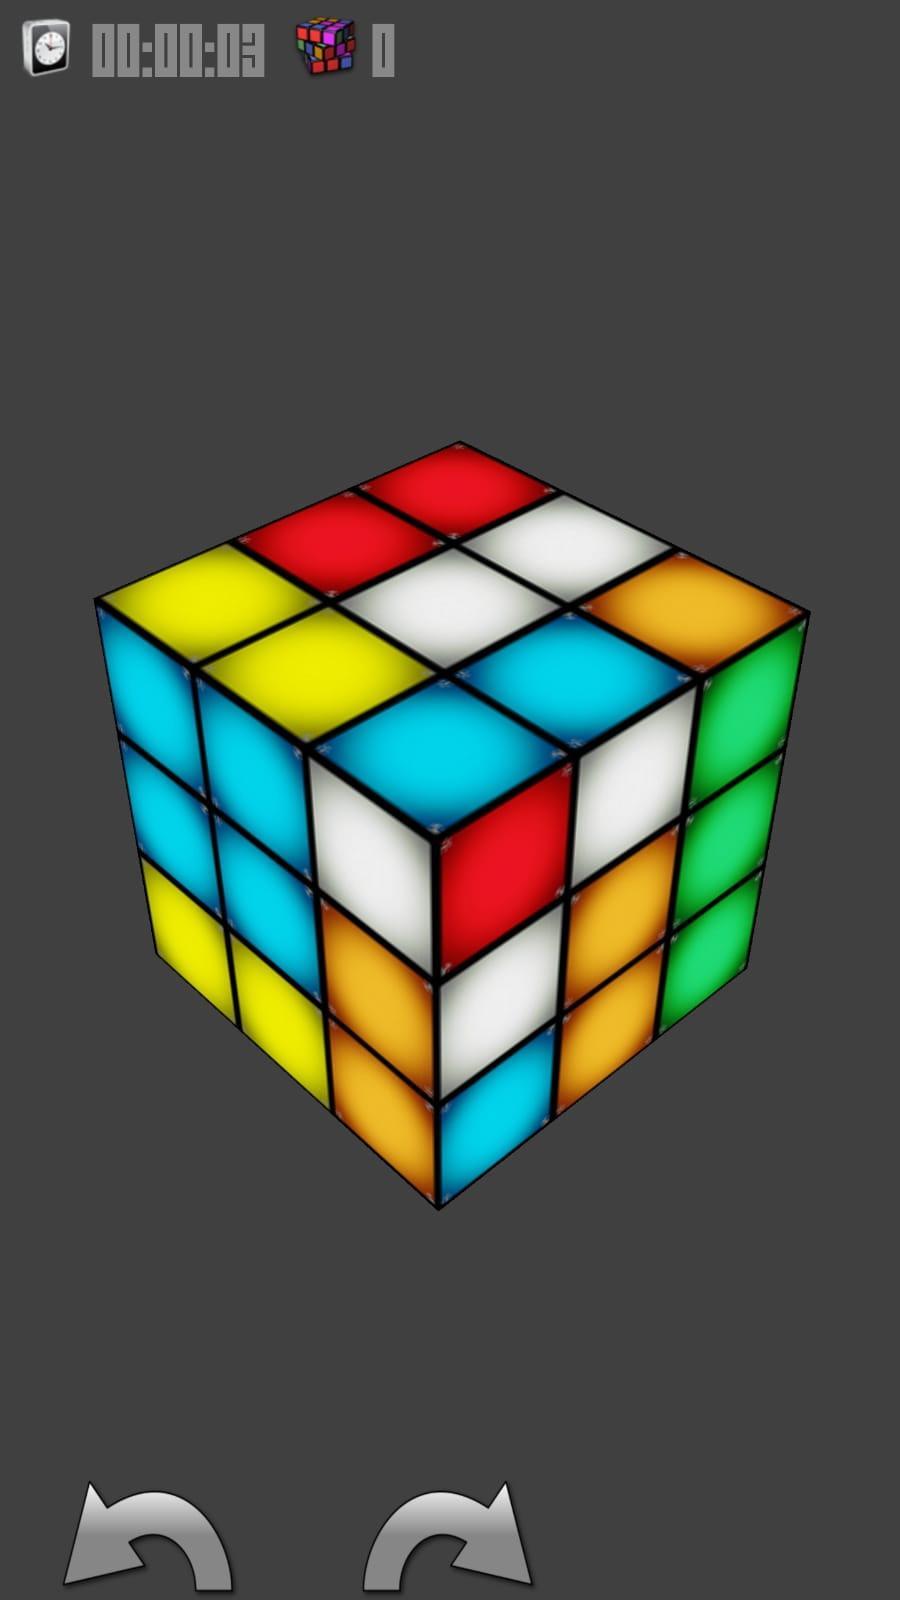 Screenshot 1 of cube - game puzzle 3D 1.0